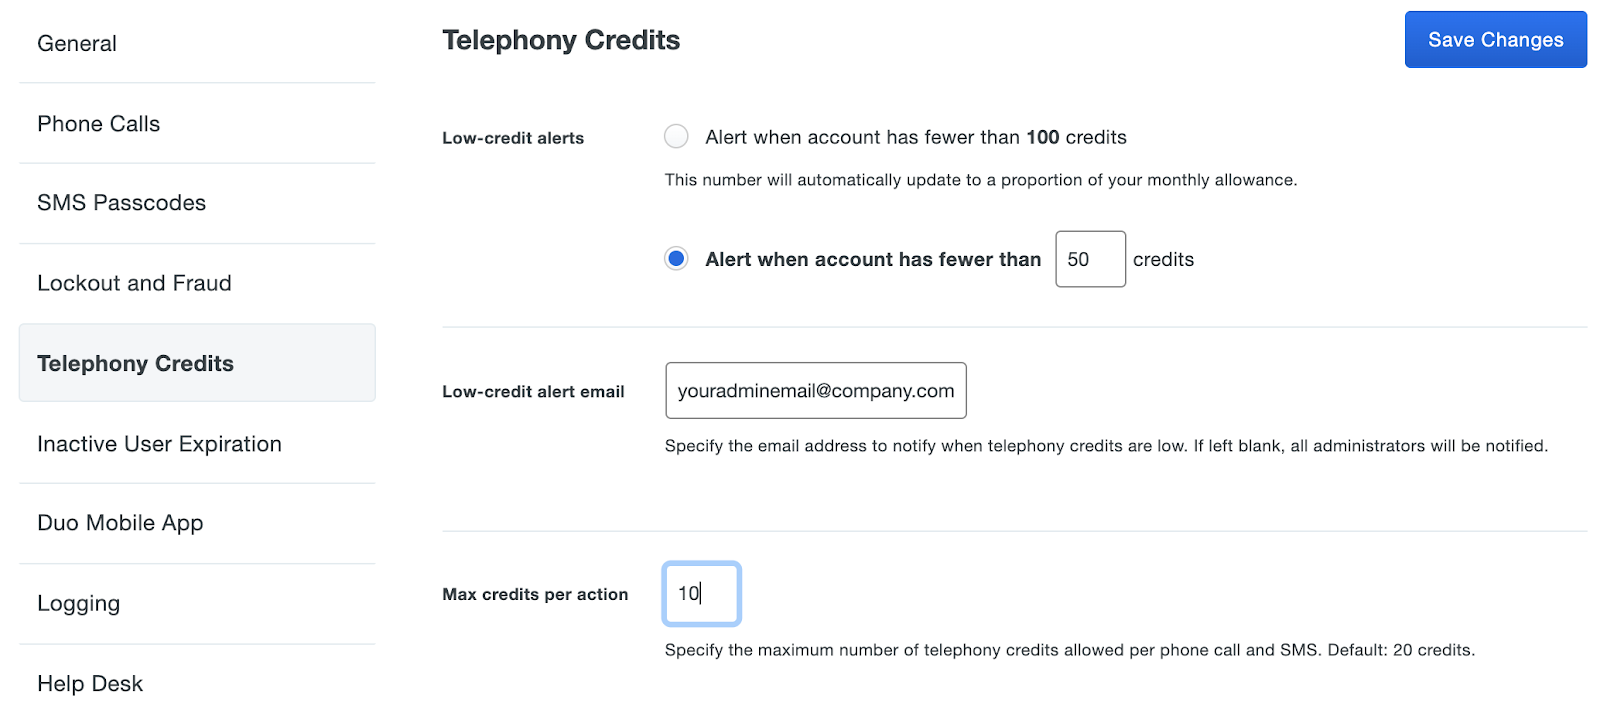 Duo's Telephony Credits tab, with options showing for low-credit alerts, alert email and max credits per action.